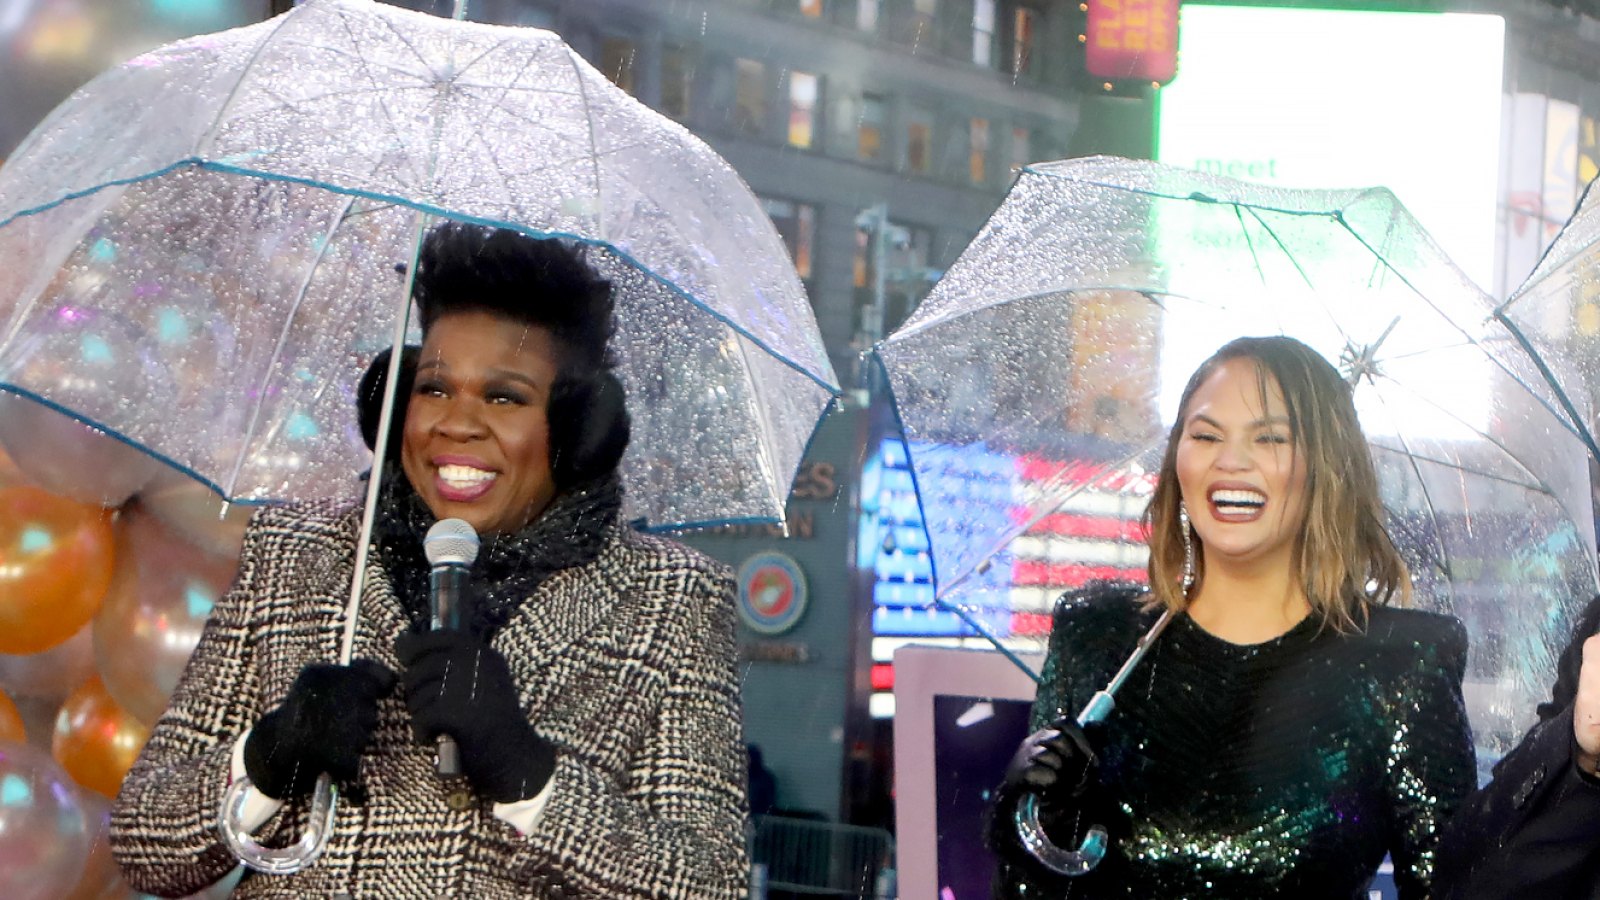 Leslie-Jones-Apologizes-After-Hilariously-Hitting-Chrissy-Teigen-in-the-Face-With-an-Umbrella